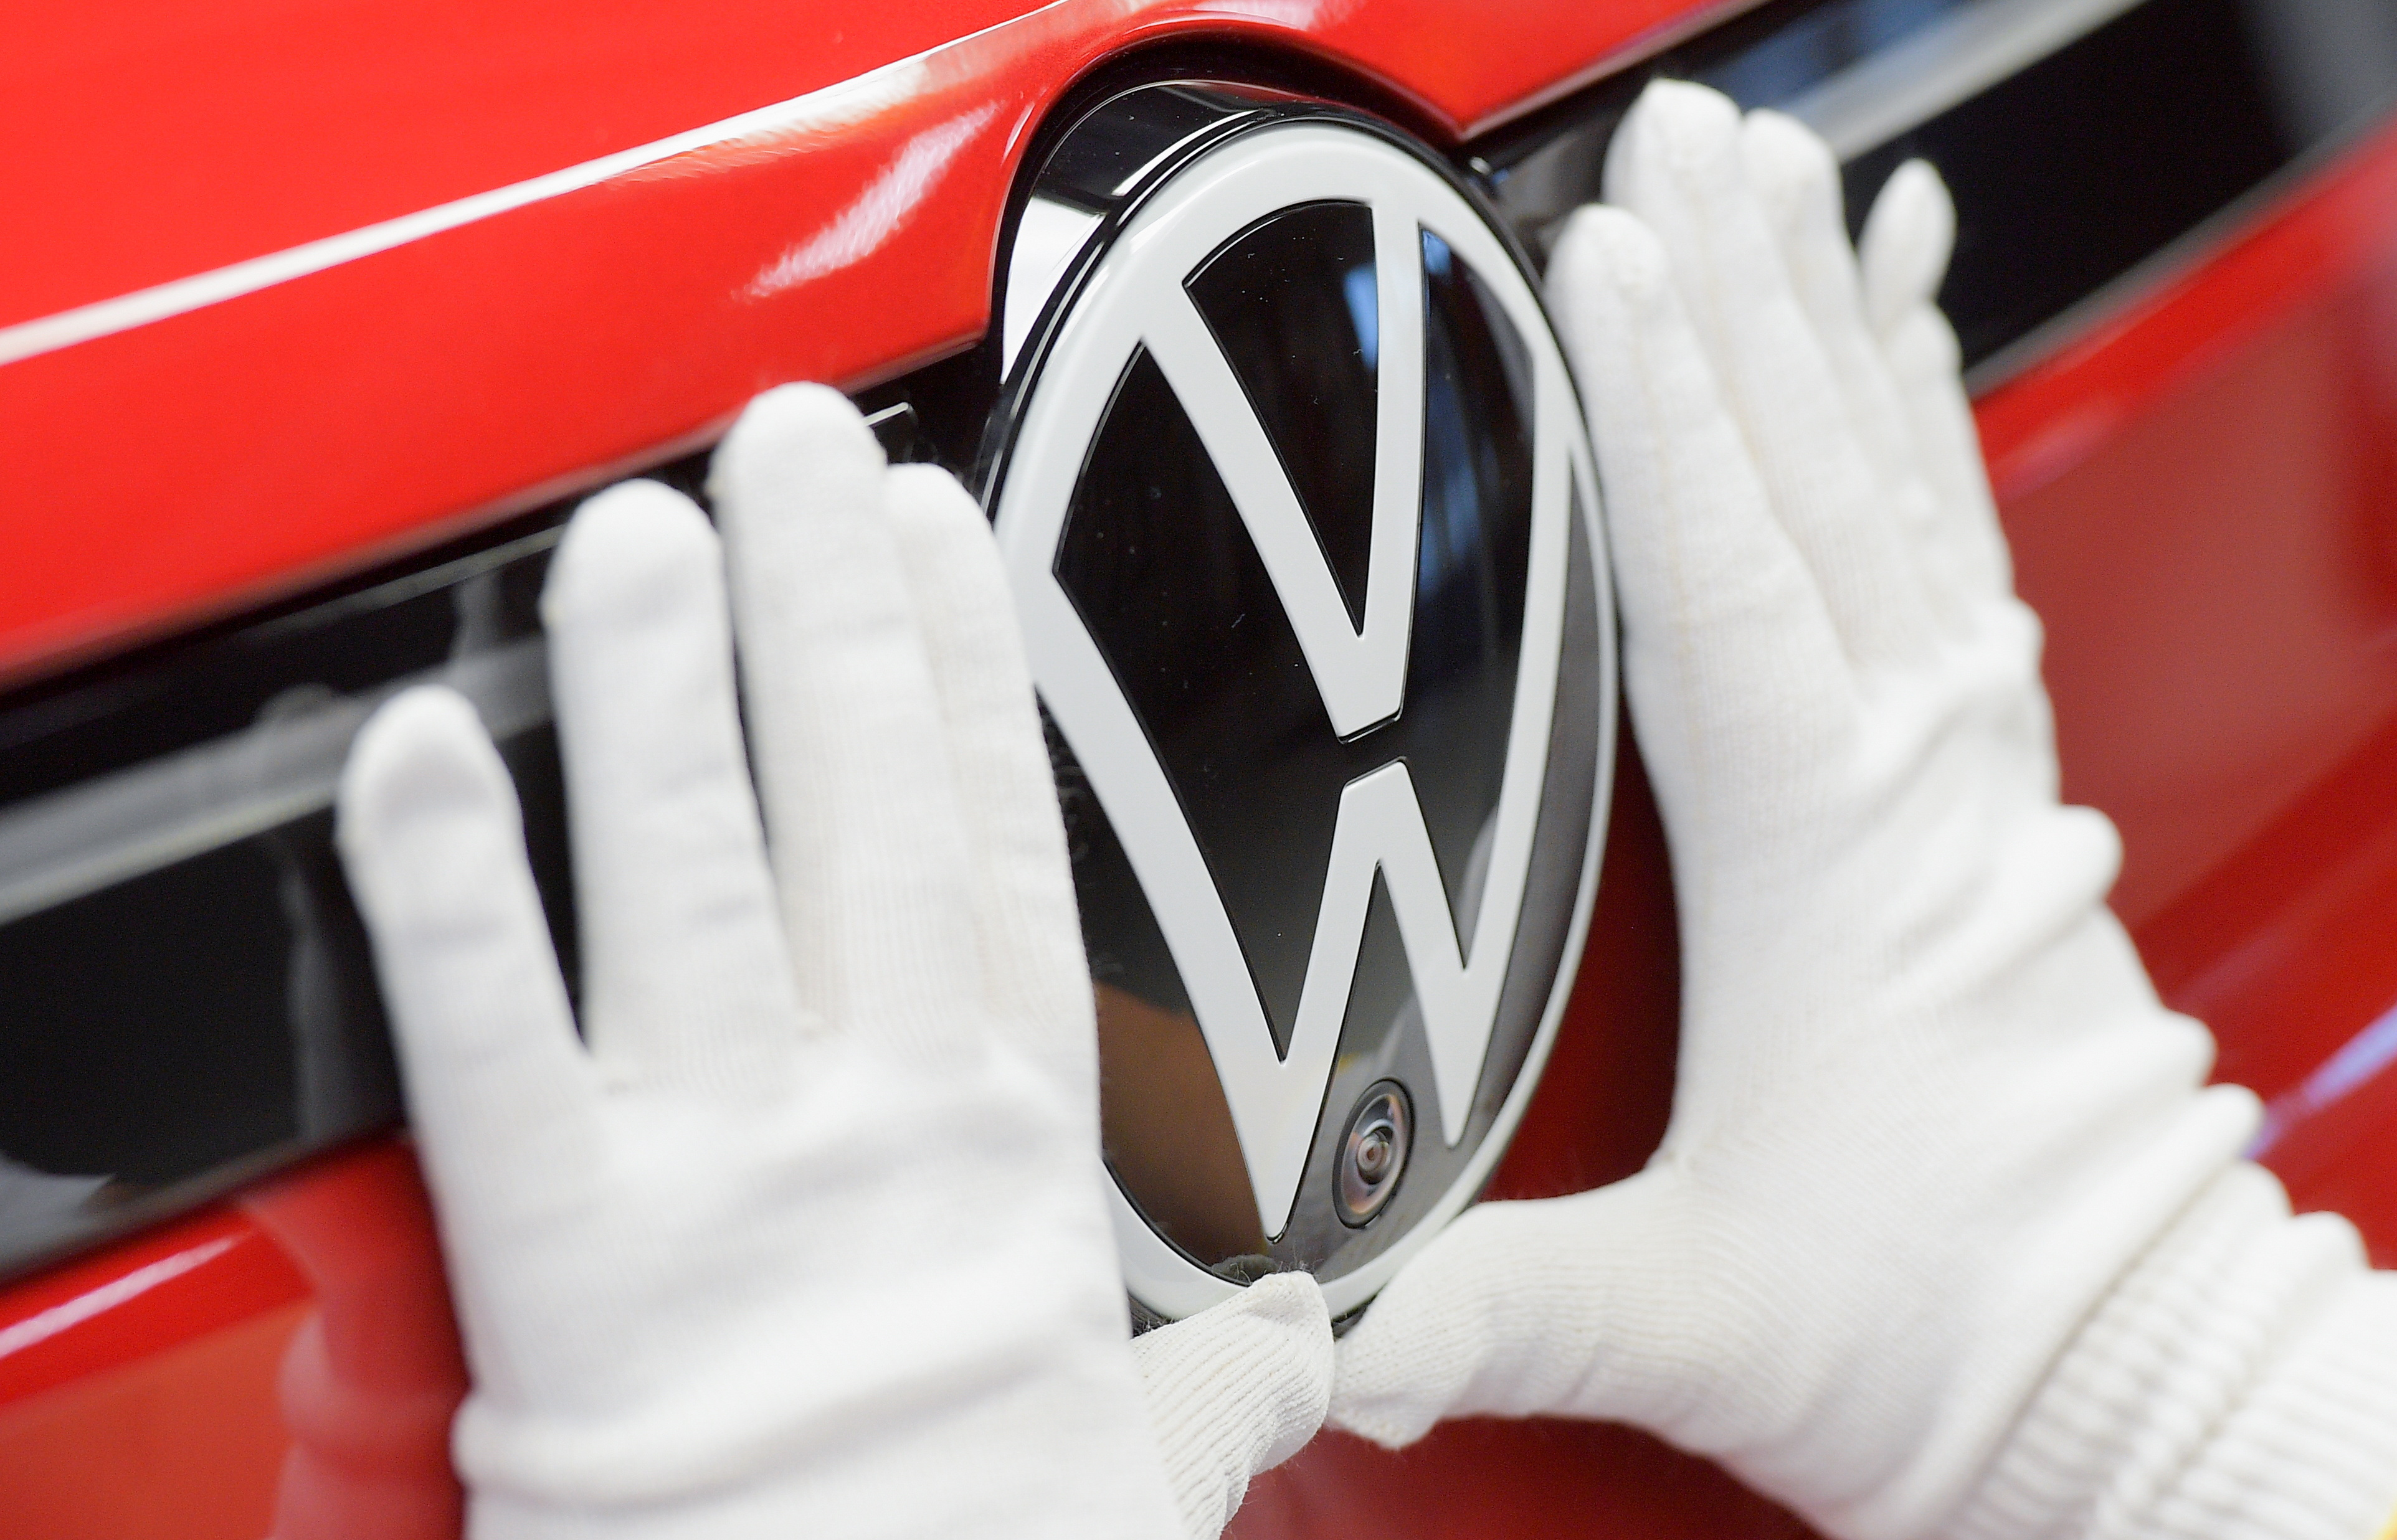 Volkswagen's Scout unit wins $1.3 bln in incentives for South